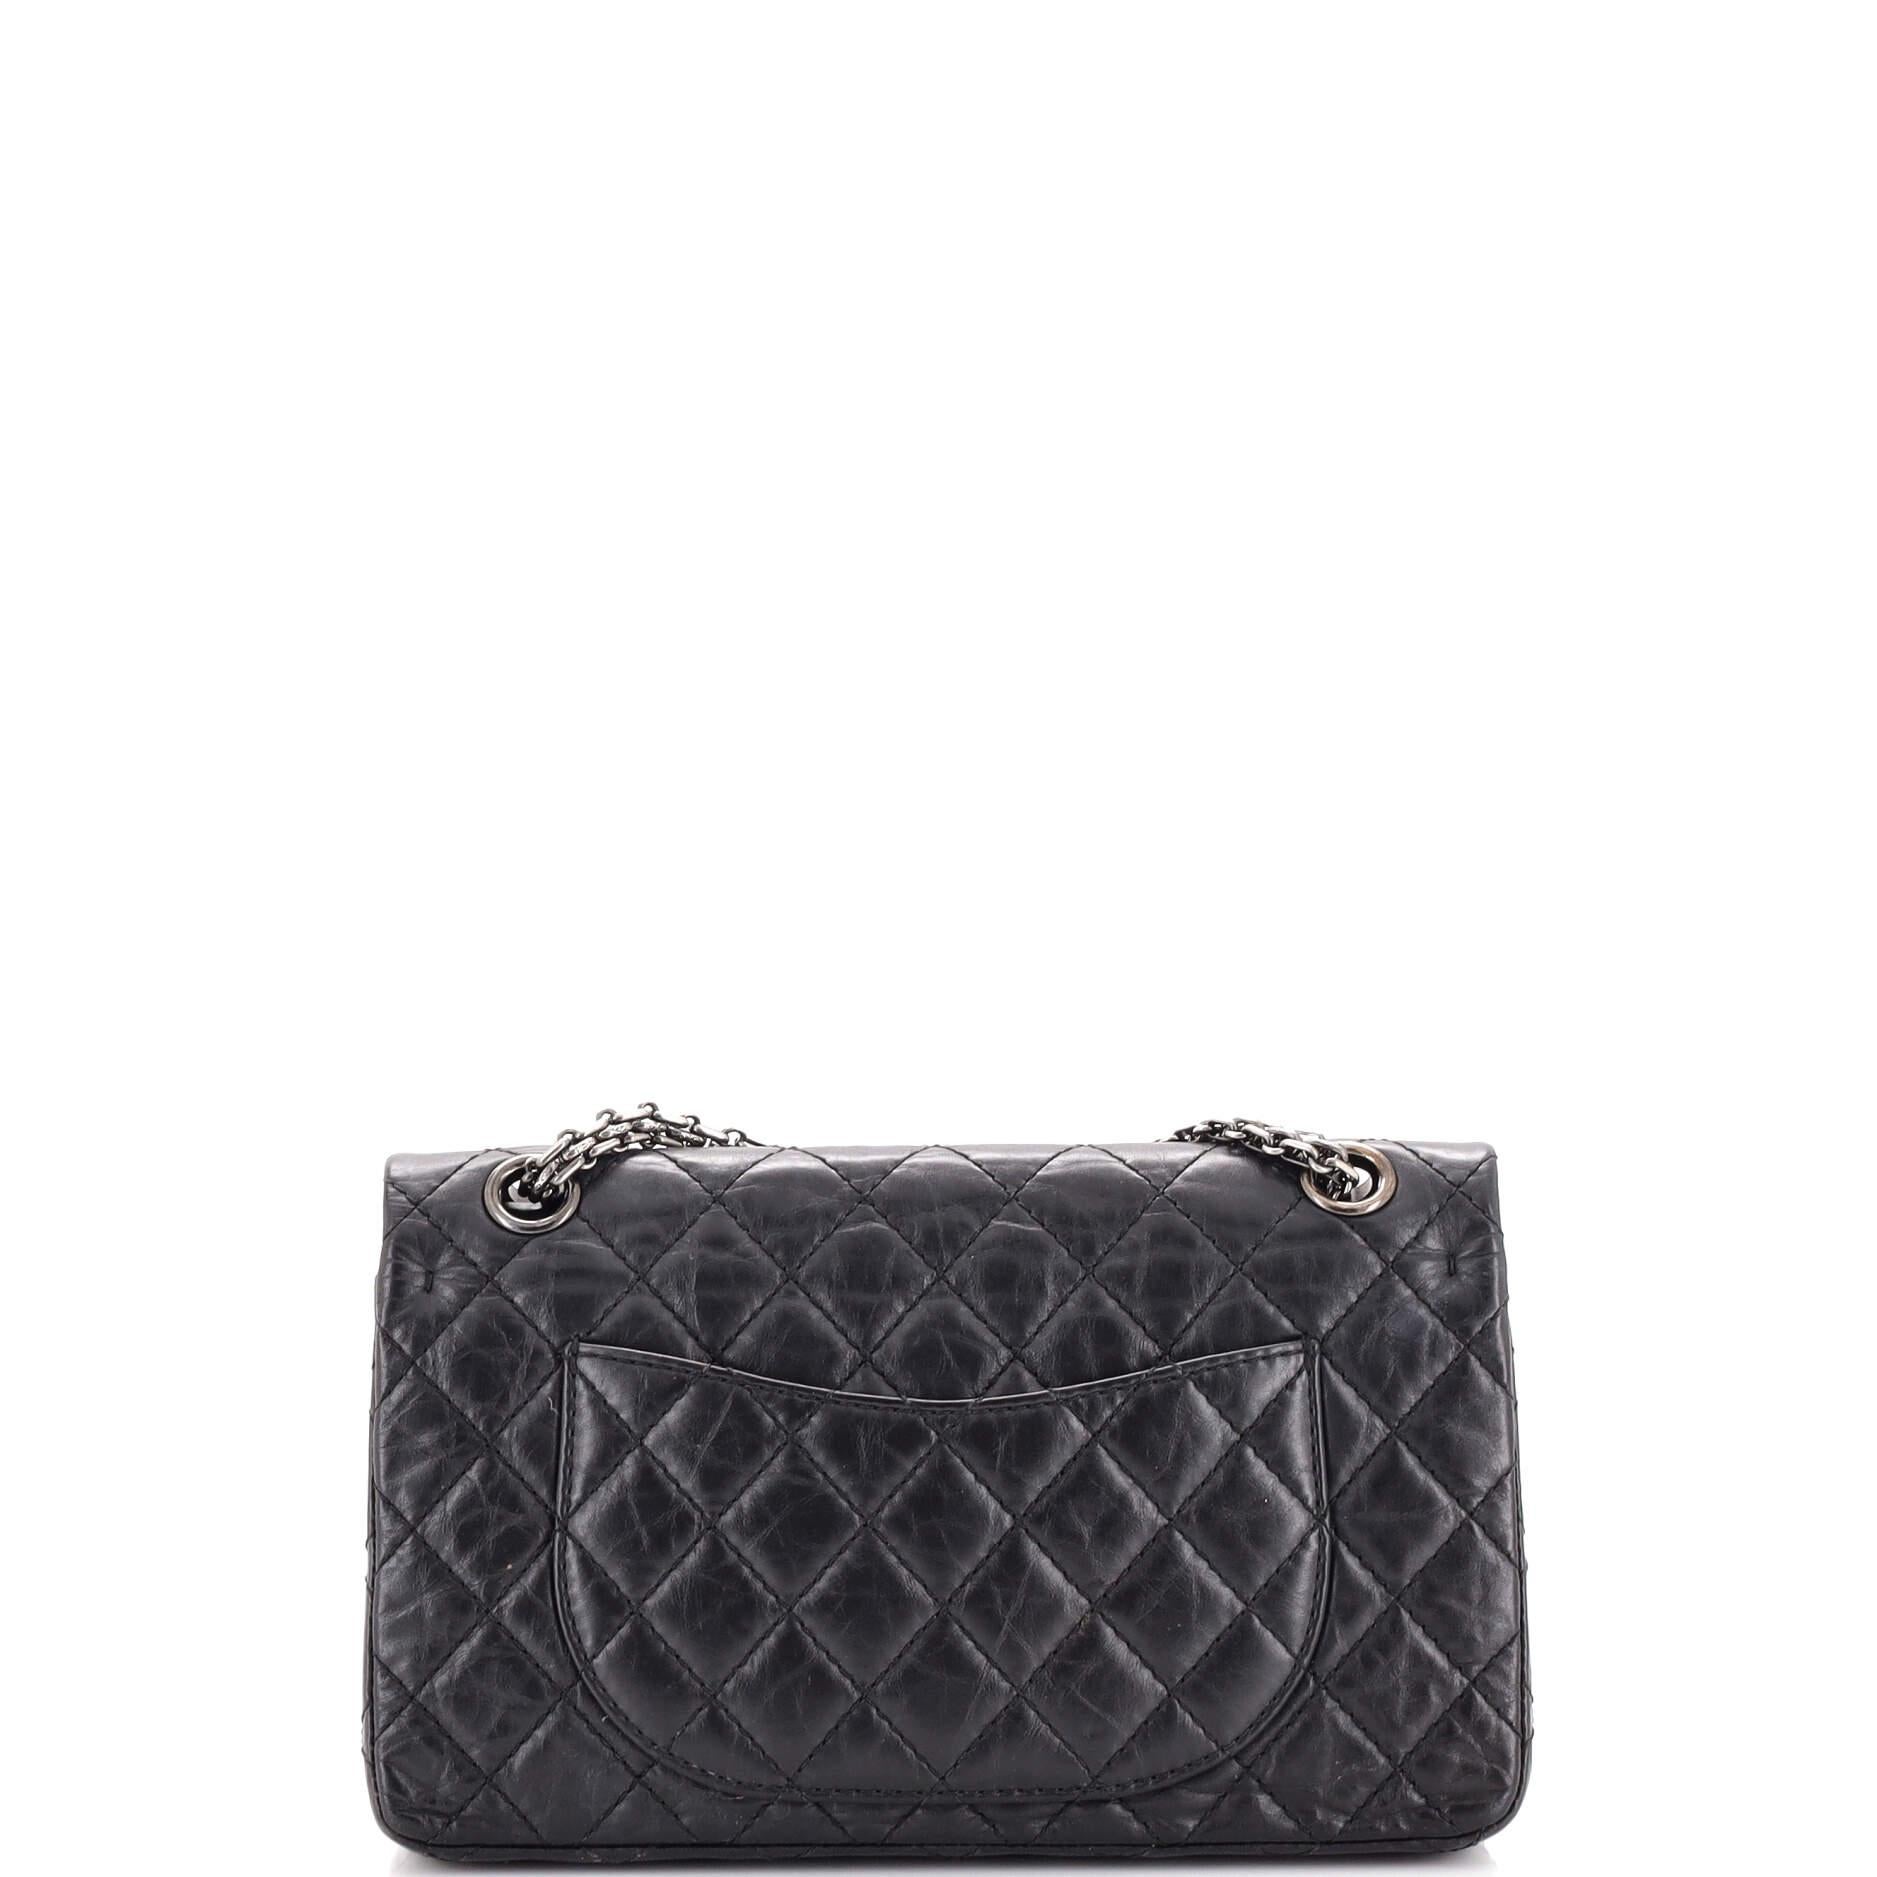 Women's or Men's Chanel So Black Reissue 2.55 Flap Bag Quilted Aged Calfskin 225